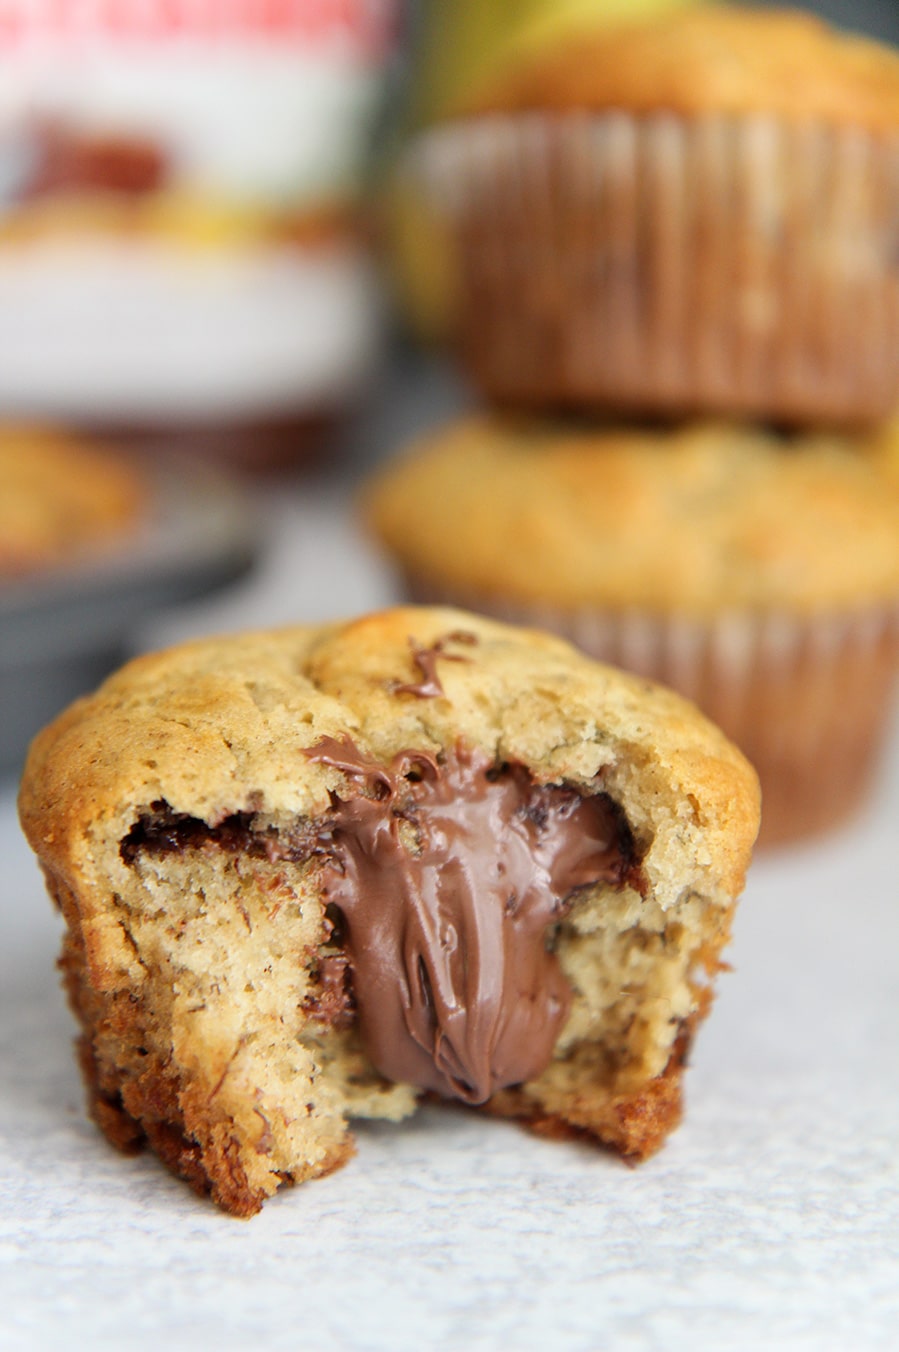 Nutella stuffed banana muffin up close with a nutella jar and more muffins in the background.